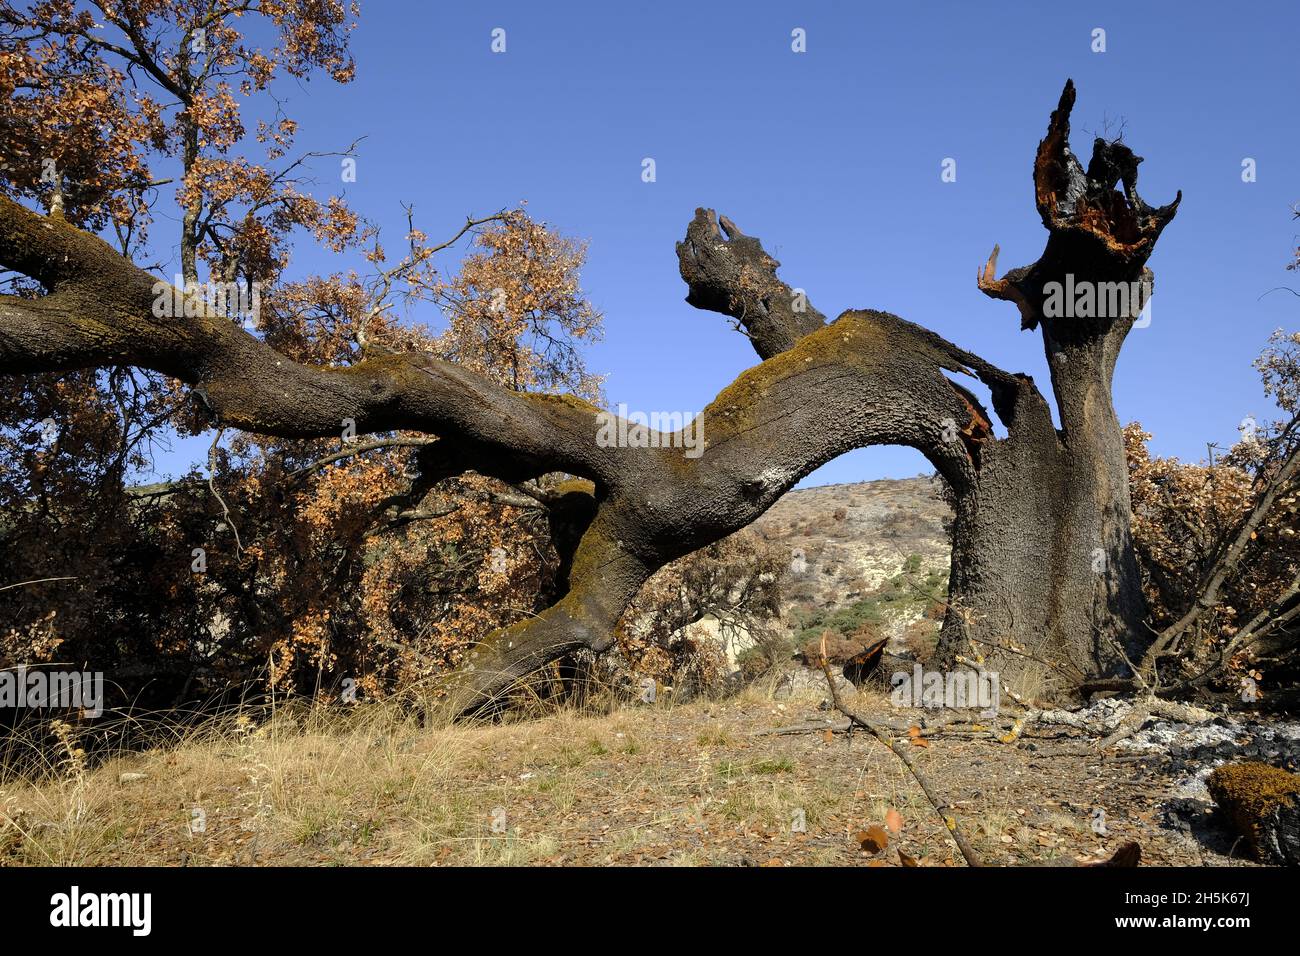 Remains of an ancient Holm oak tree destroyed in a summer wildfire. Algar, Sierras Subbeticas Natural Park, Cordoba Province, Andalucia, Spain Stock Photo